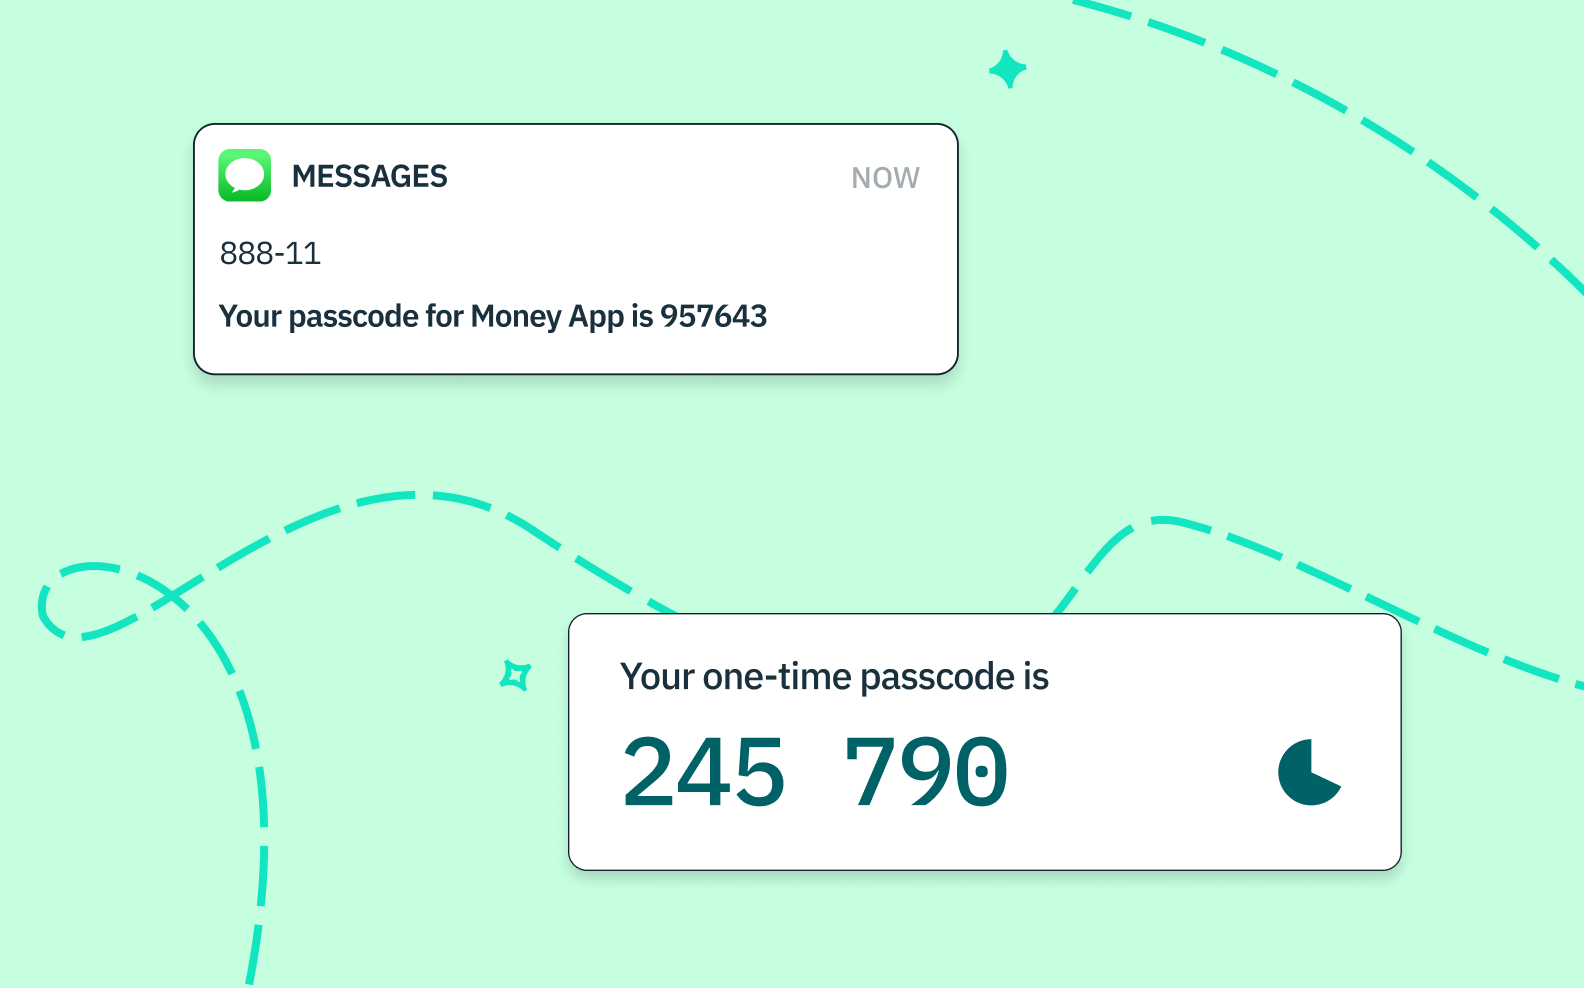 Two screen shots – one of a one-time passcode over iMessage, and the other of a time-based one-time passcode being displayed in an authenticator app. All over a light green background